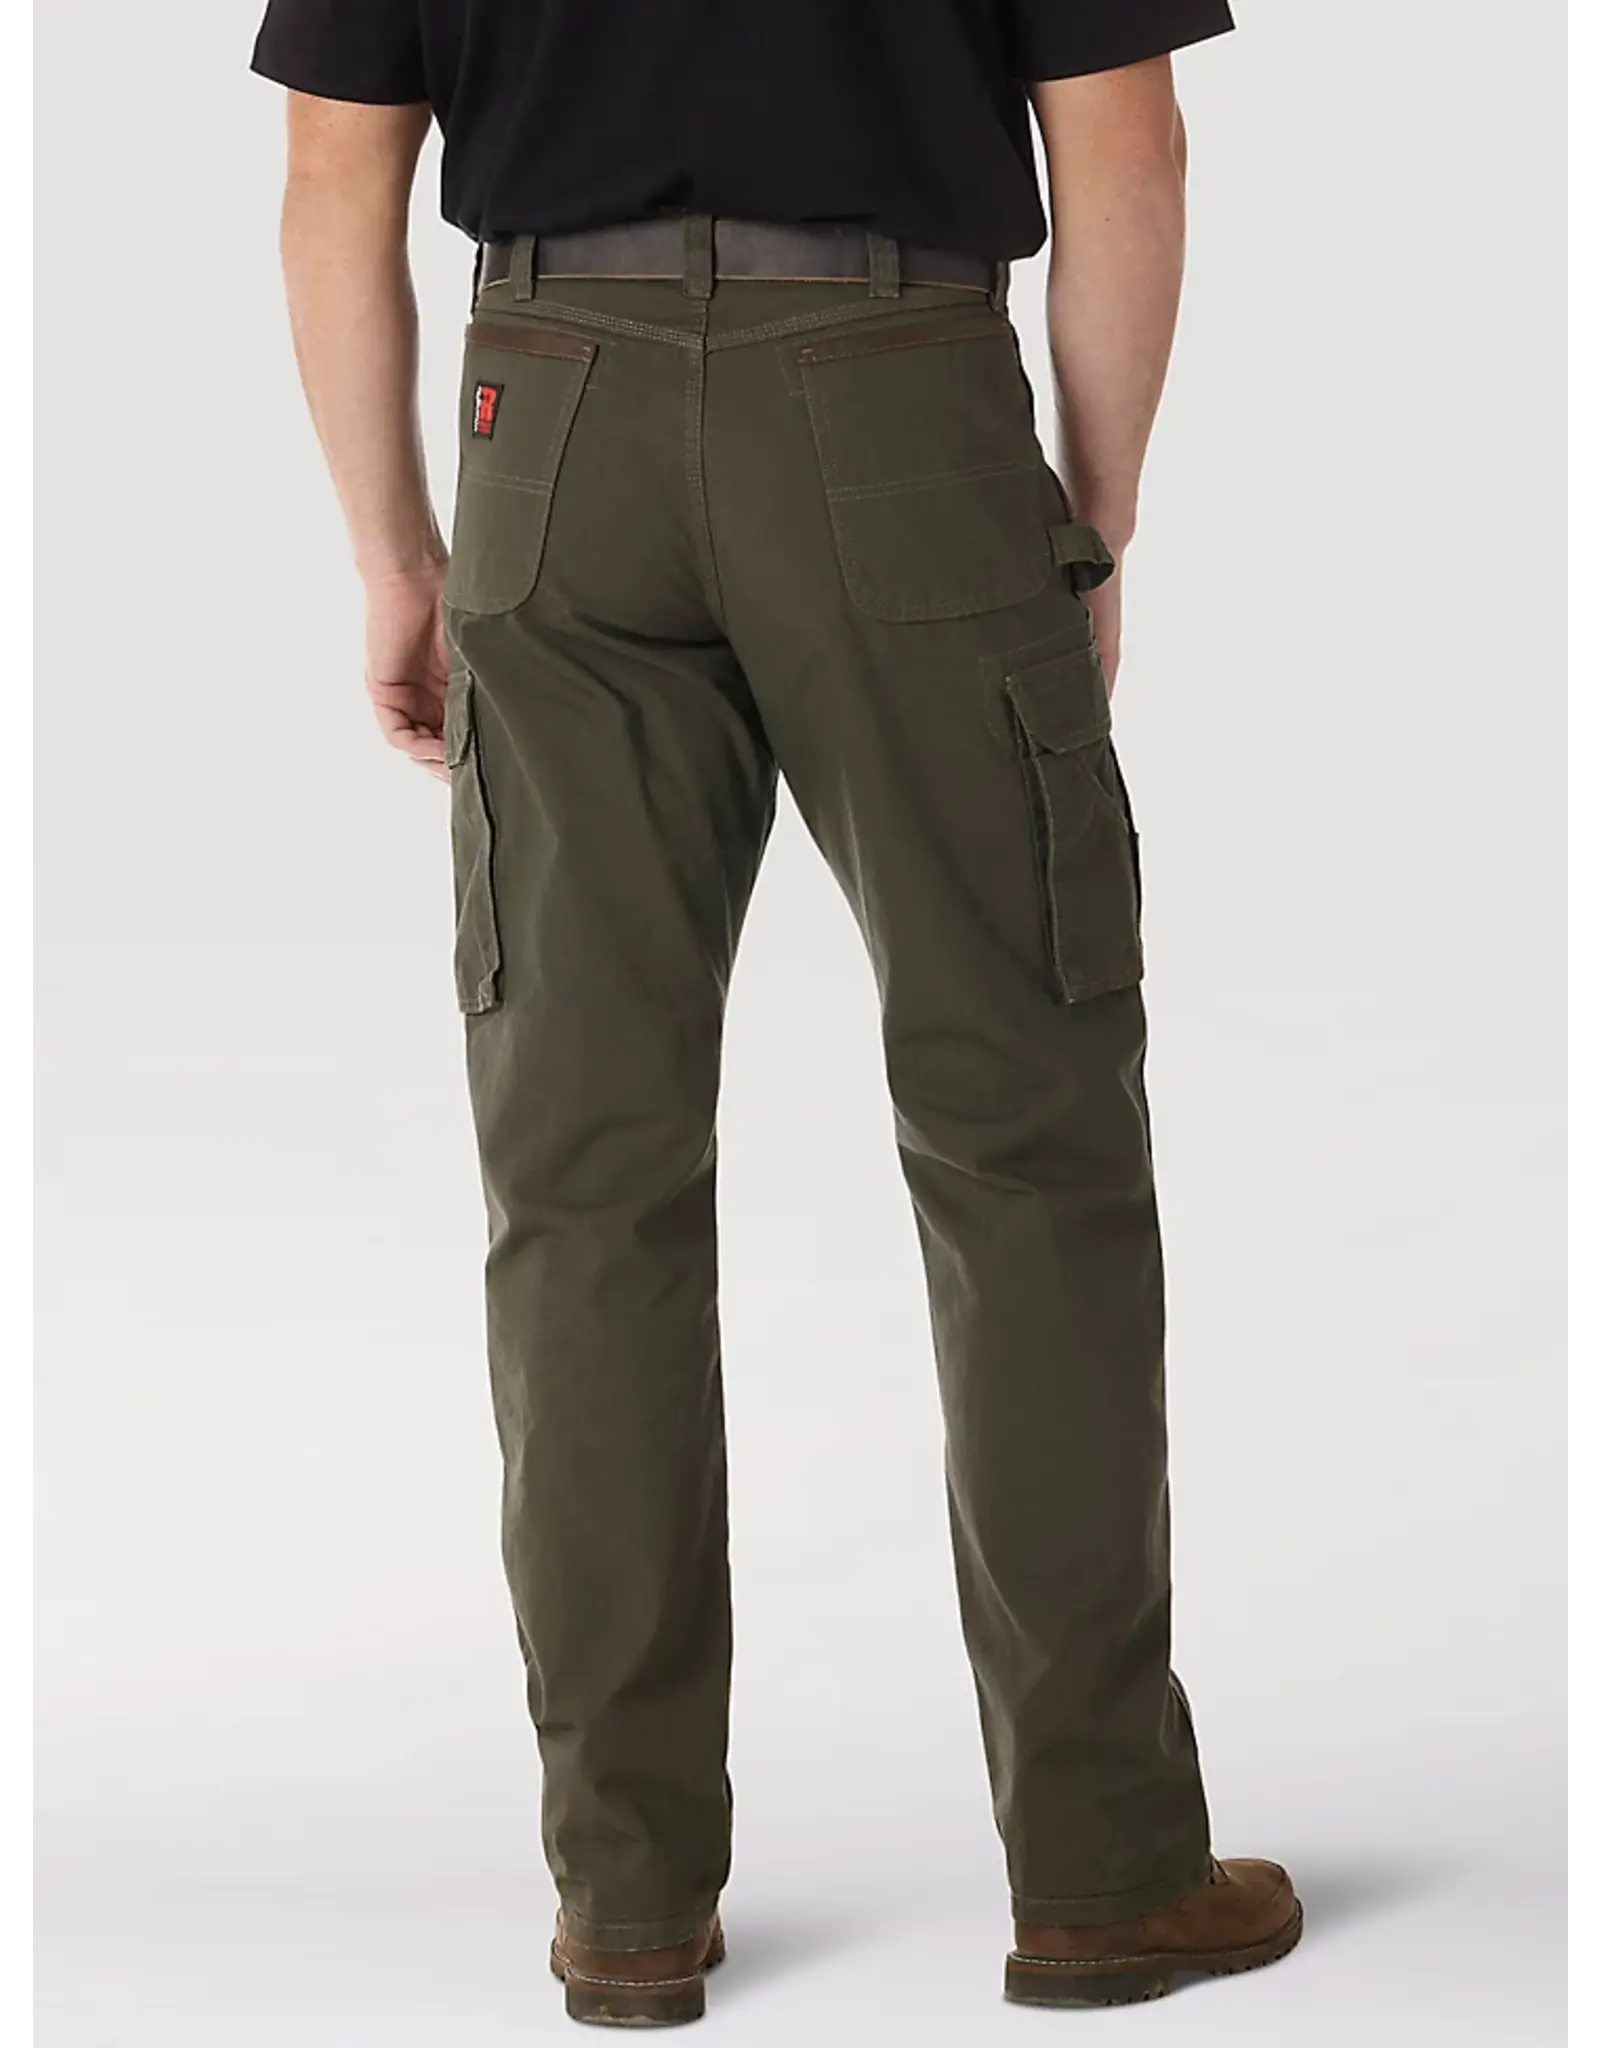 LINED RIP-STOP RANGER PANT - Smith Army Surplus